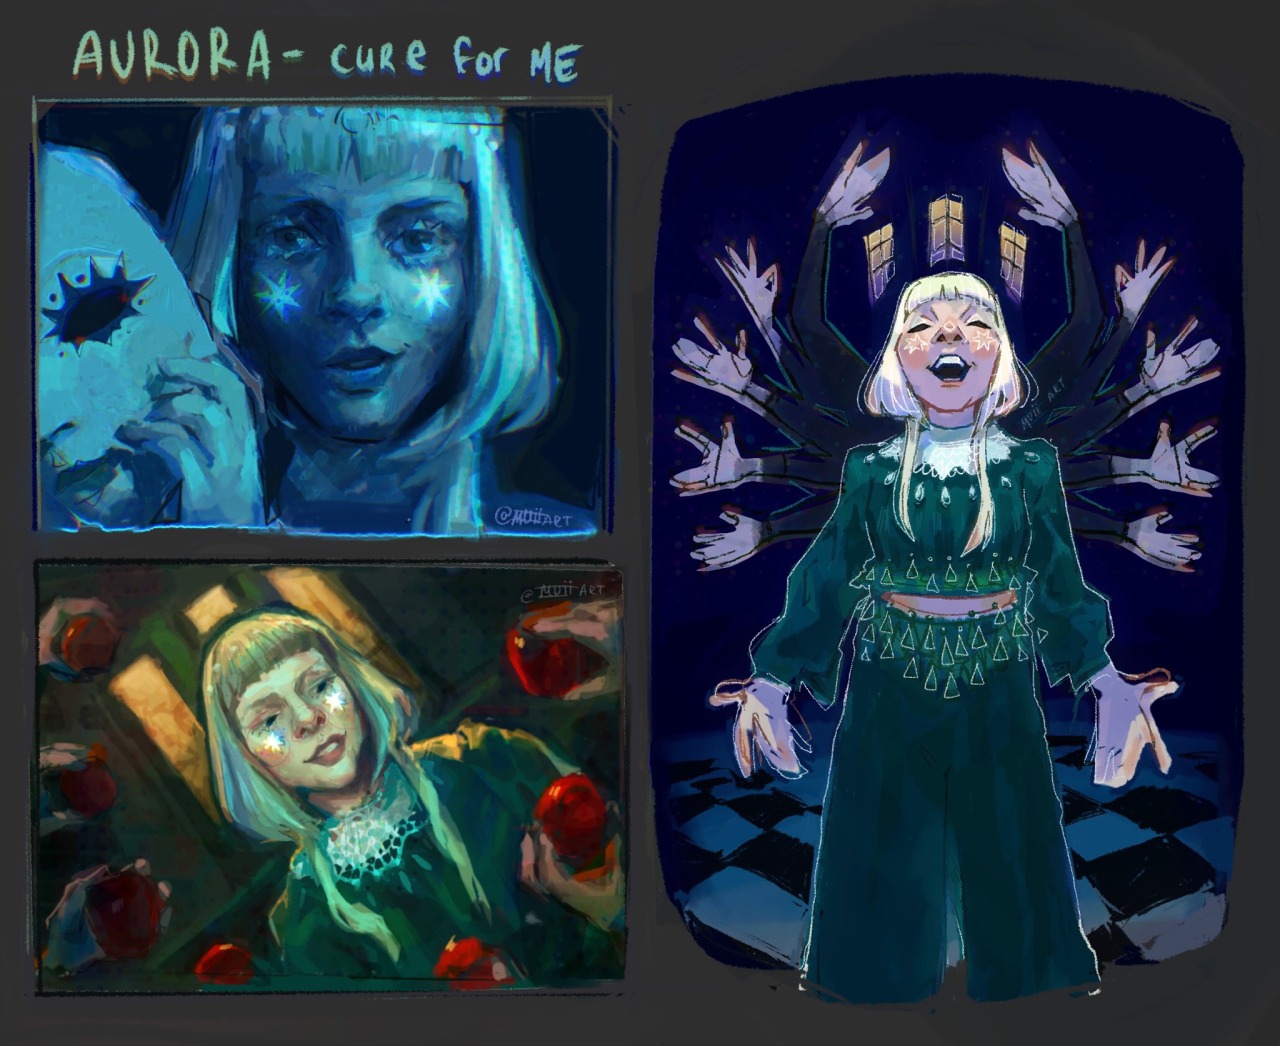 ArtStation - Aurora - Cure for me - drawing